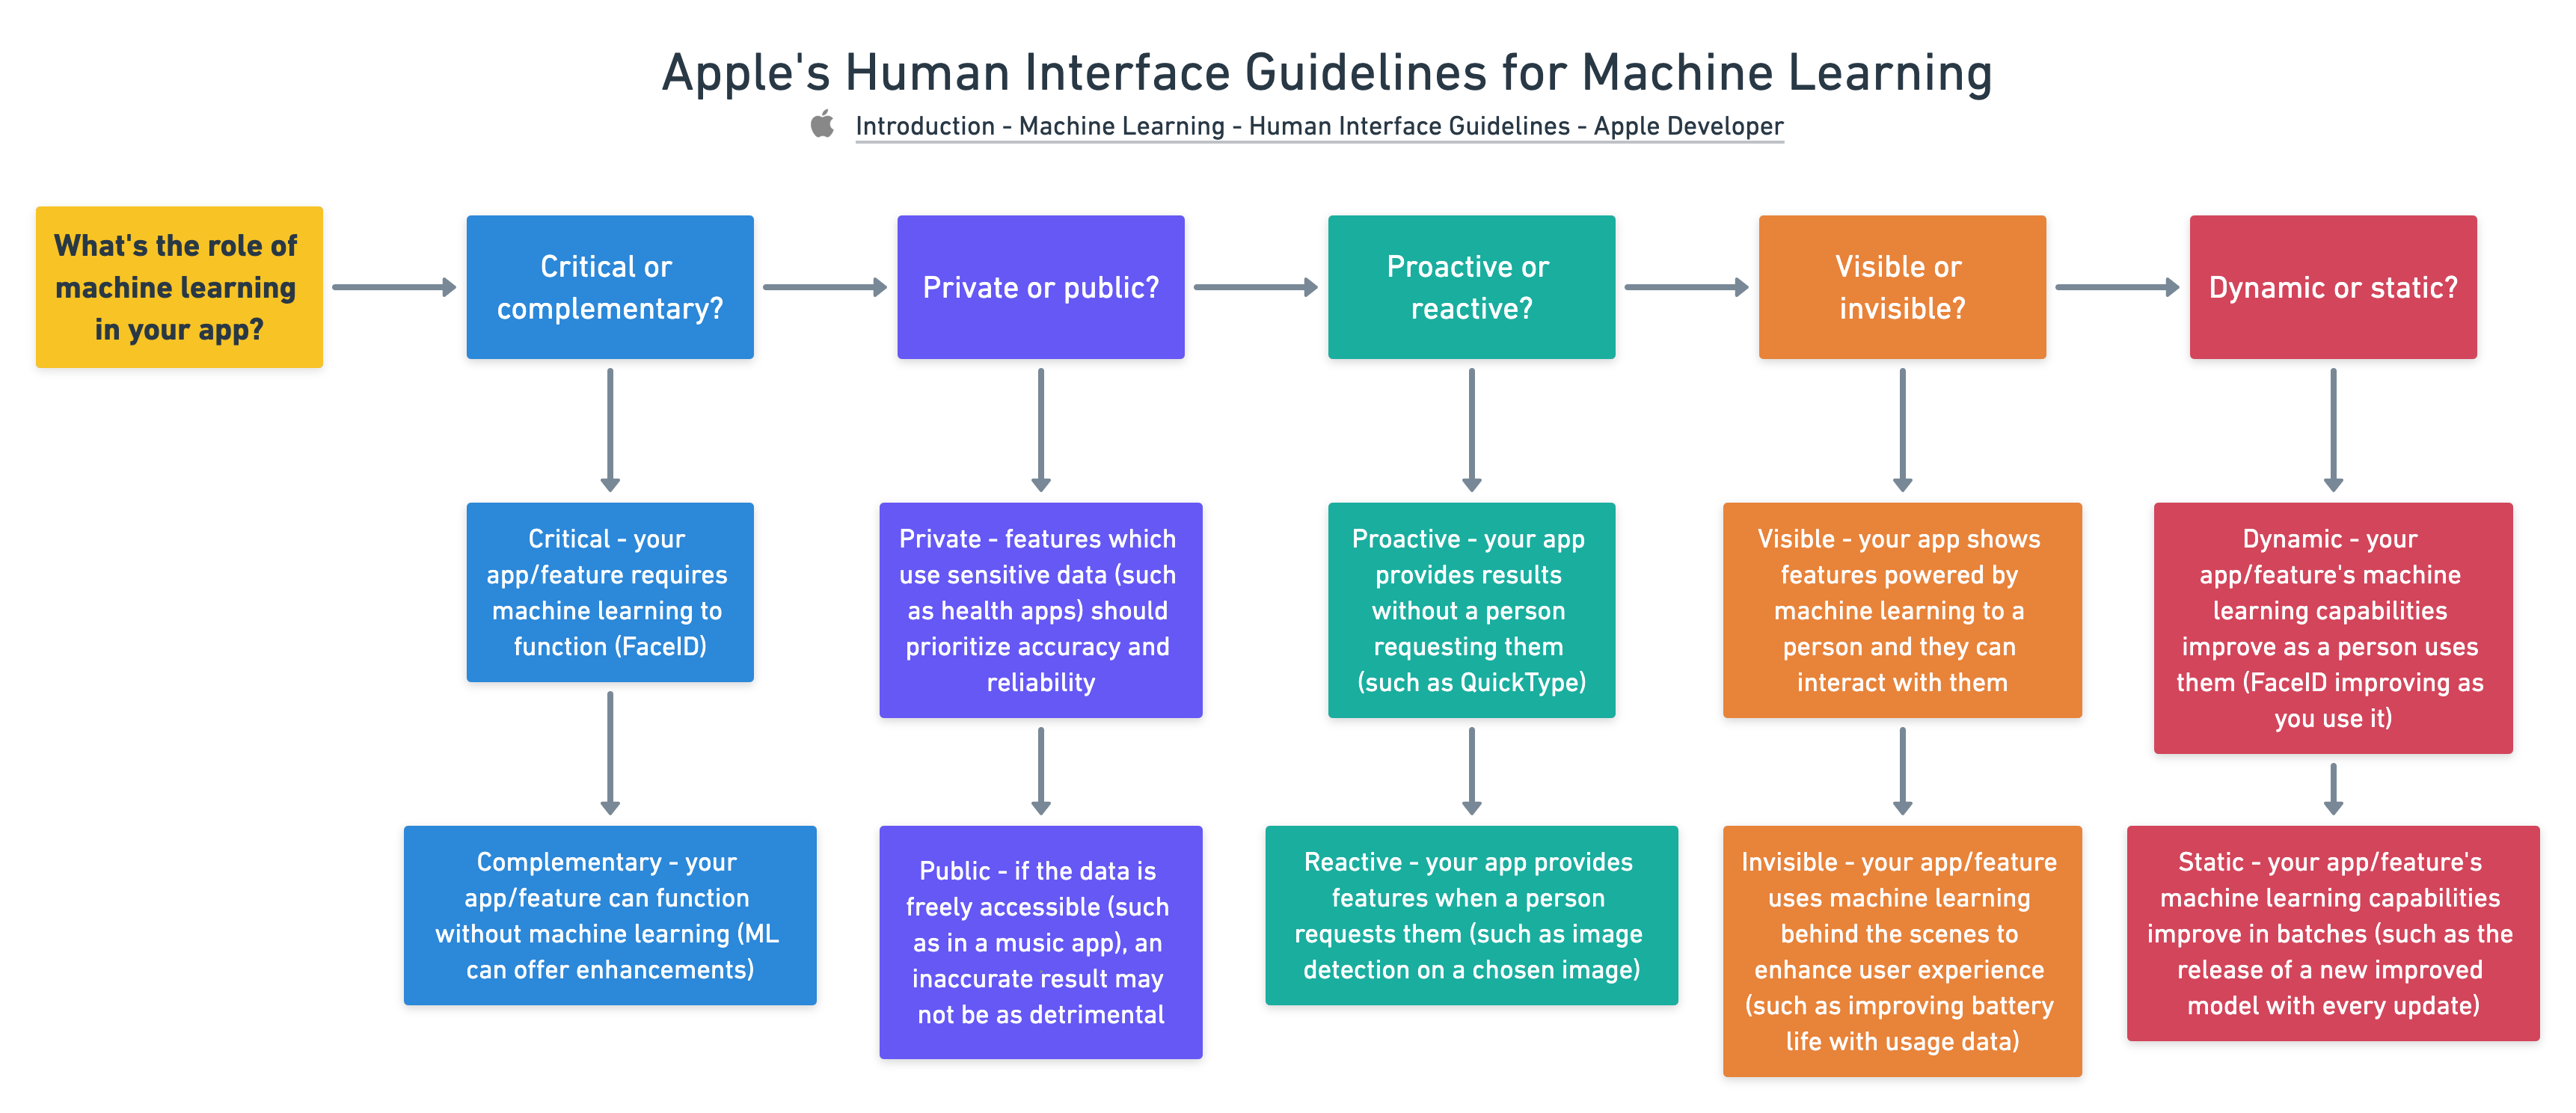 Apples Human Interface Guidelines for Machine Learning2x